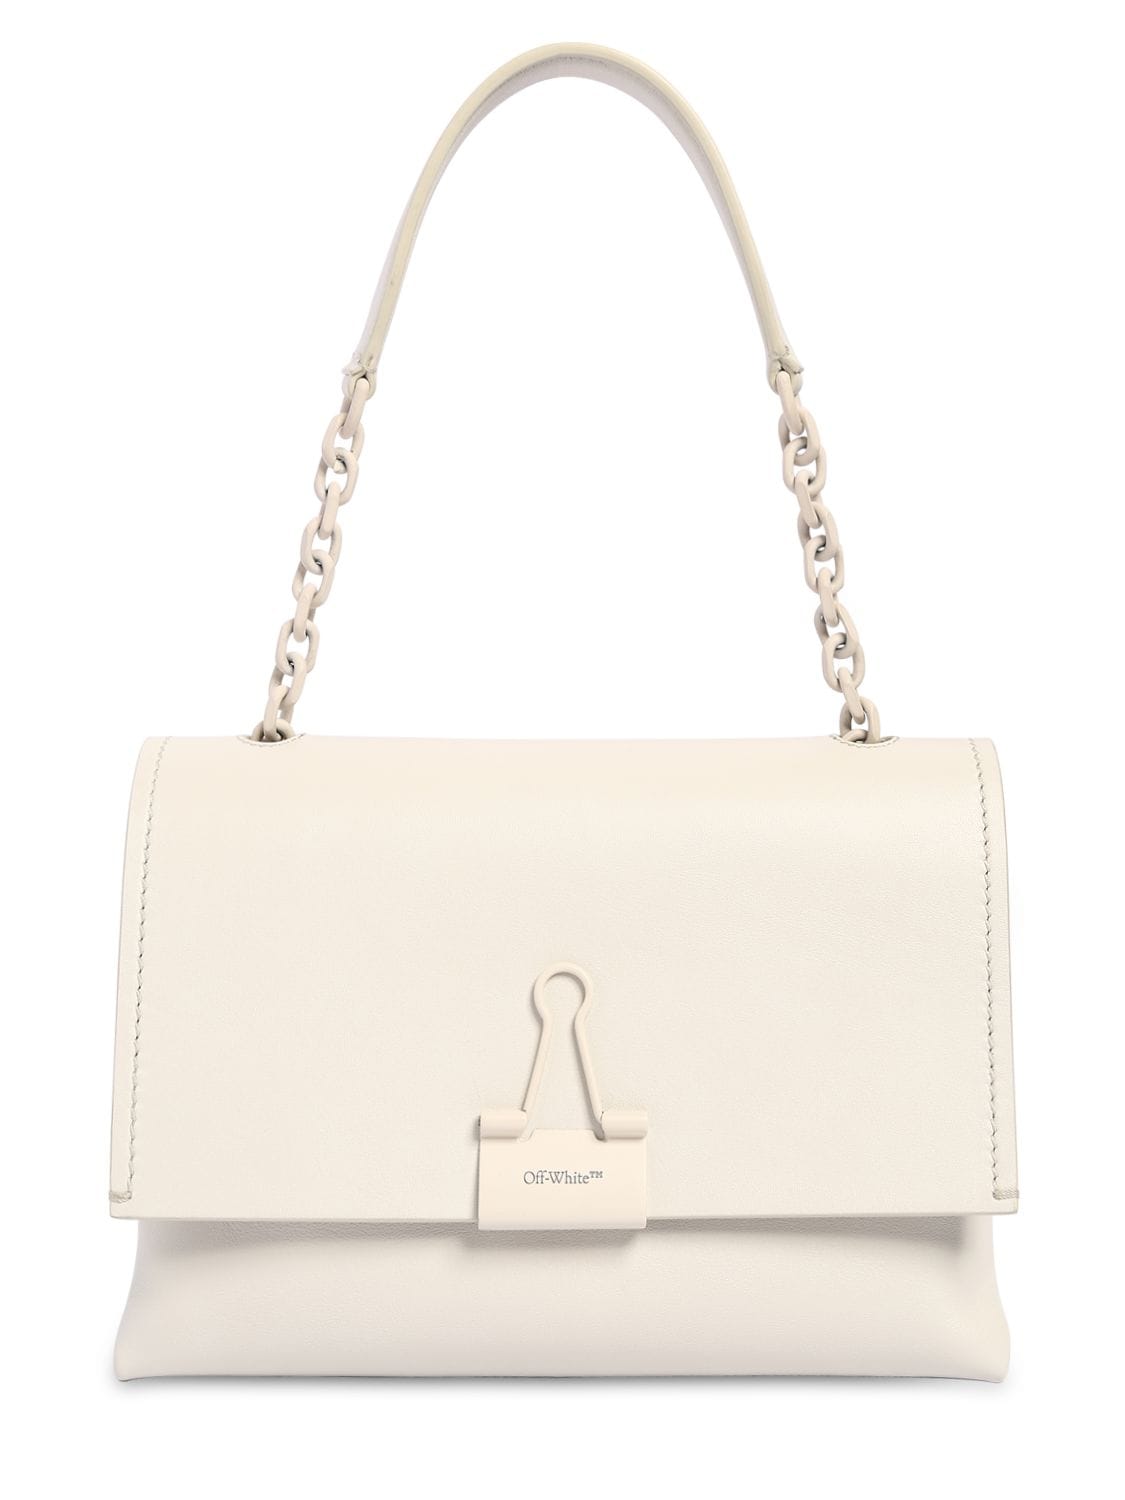 Off-white Soft Large Shoulder Bag In Ivory Color In White | ModeSens